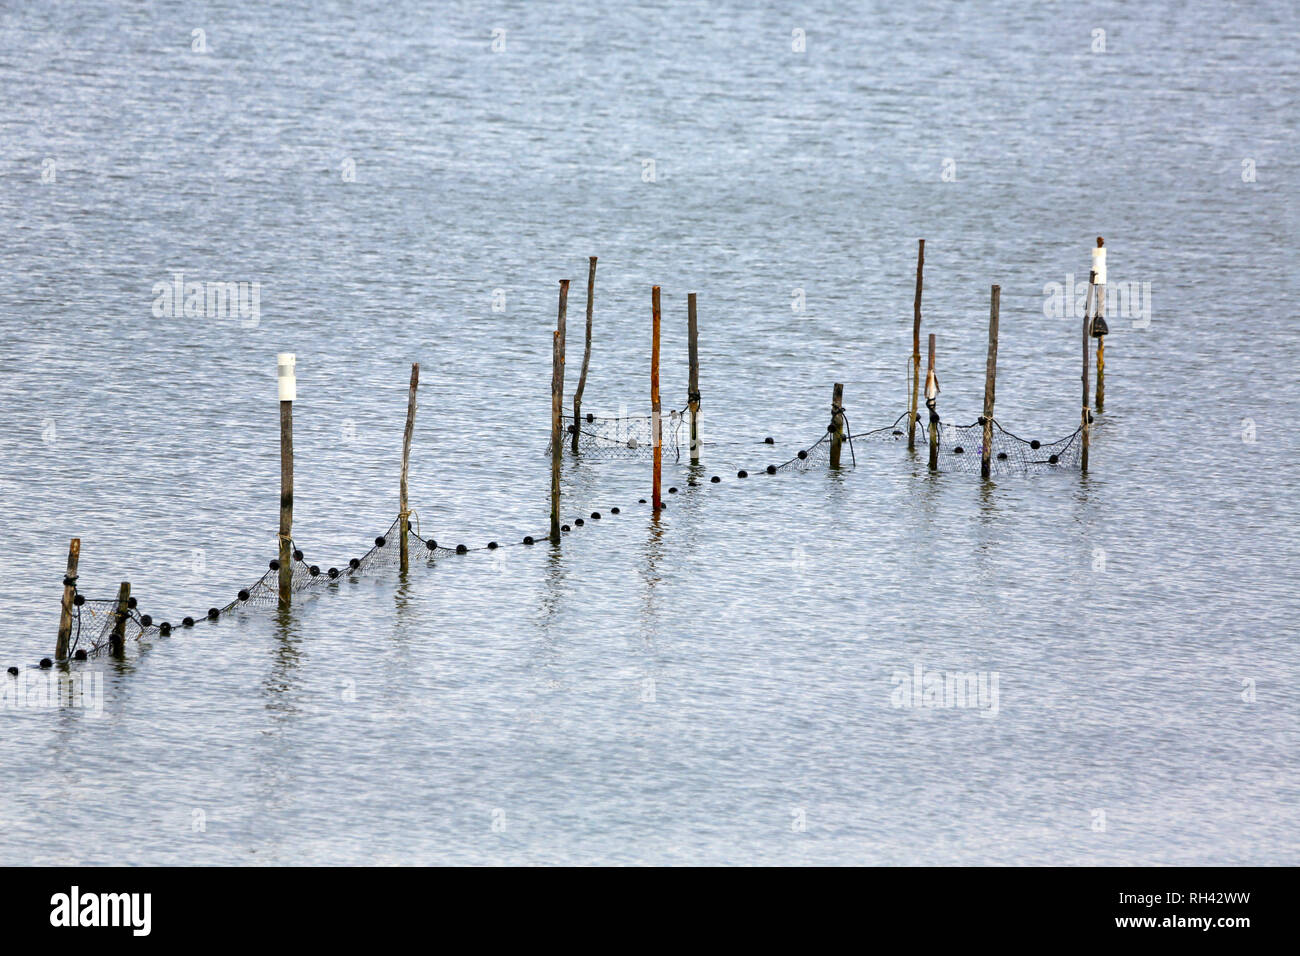 fish trap, also called a pound net, along shore of tidal river Stock Photo